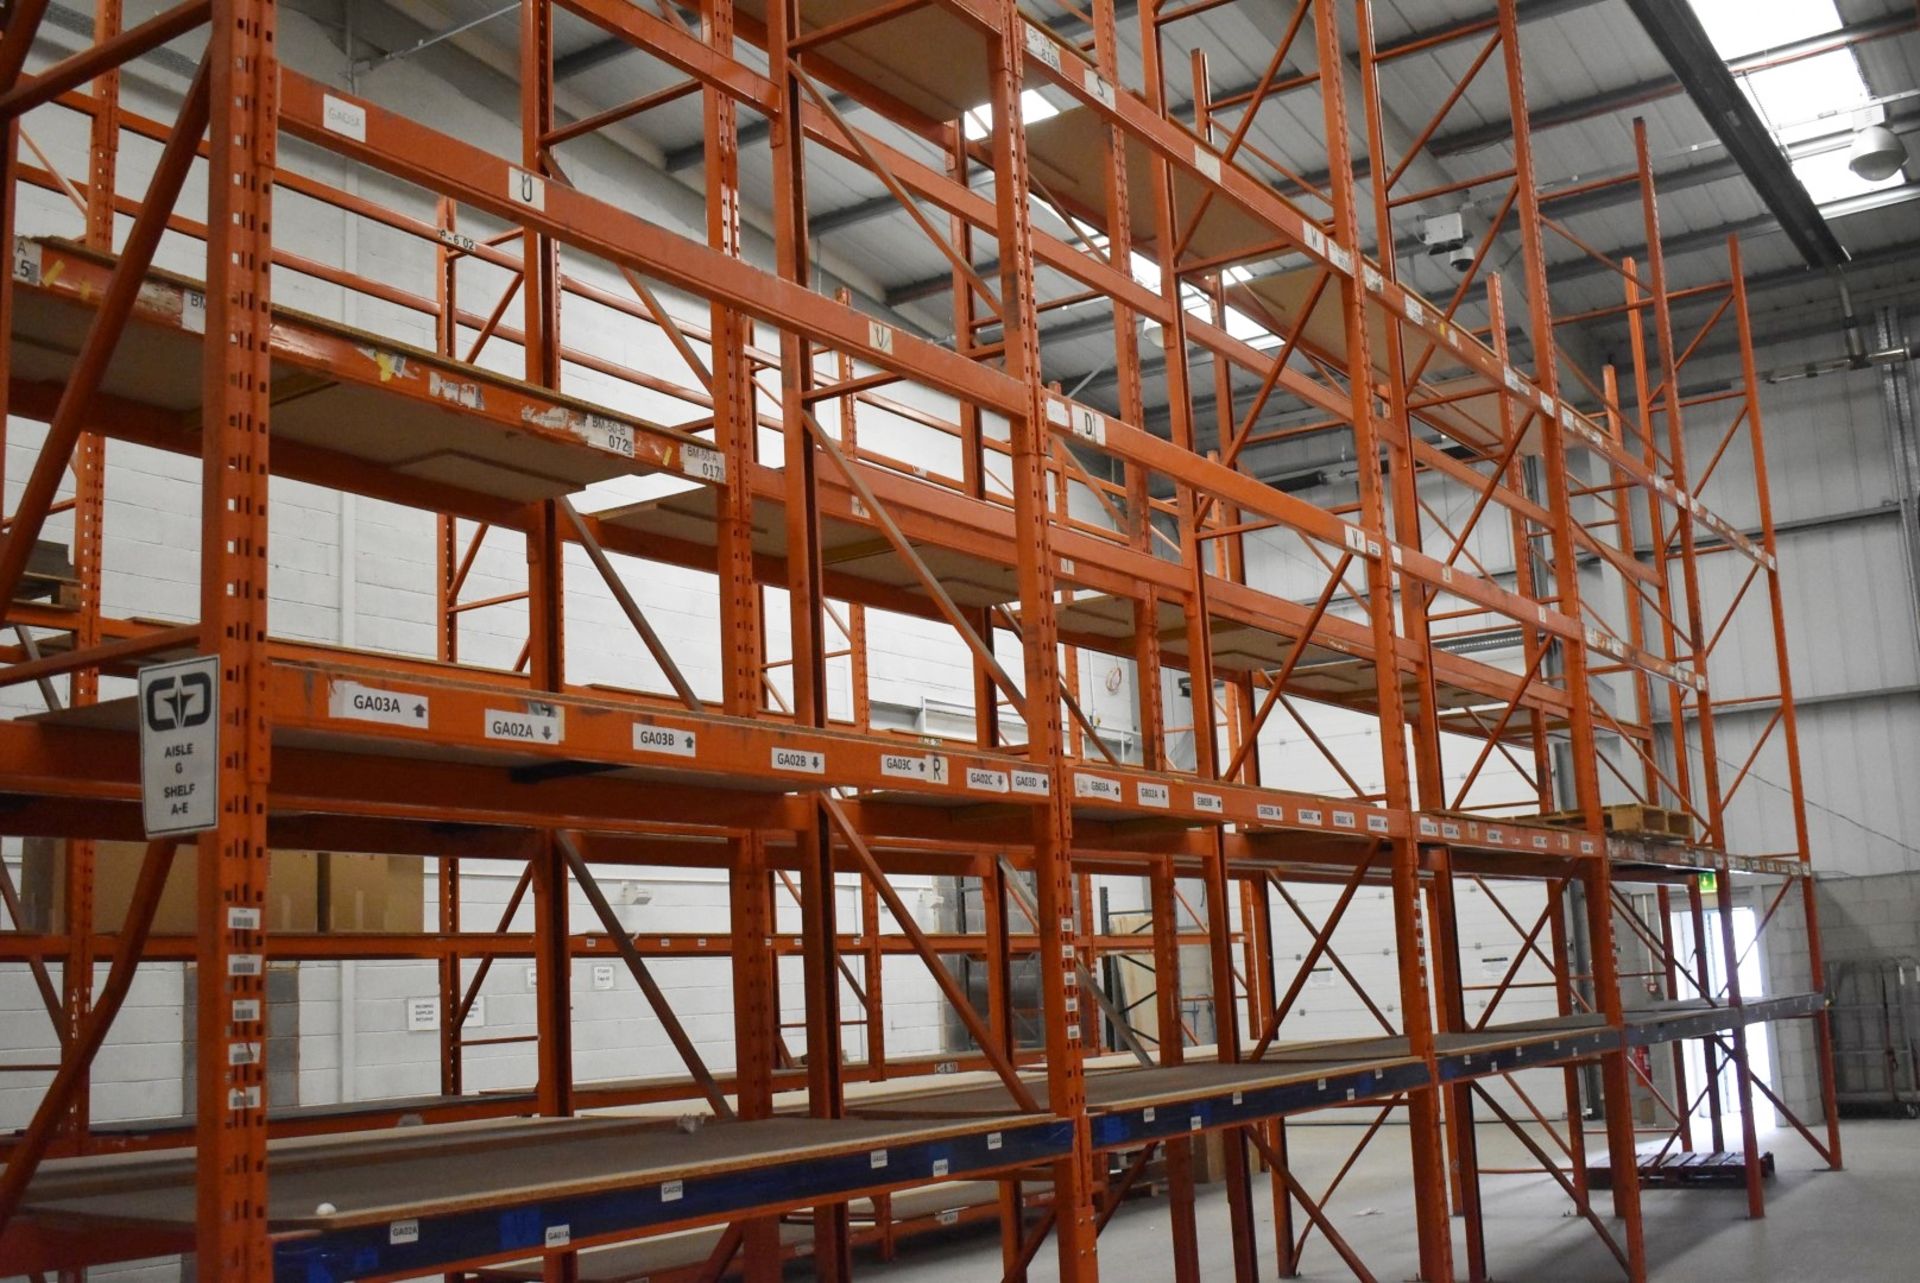 5 x Bays of RediRack Warehouse Pallet Racking - Lot Includes 6 x Uprights and 38 x Crossbeams - - Image 3 of 4